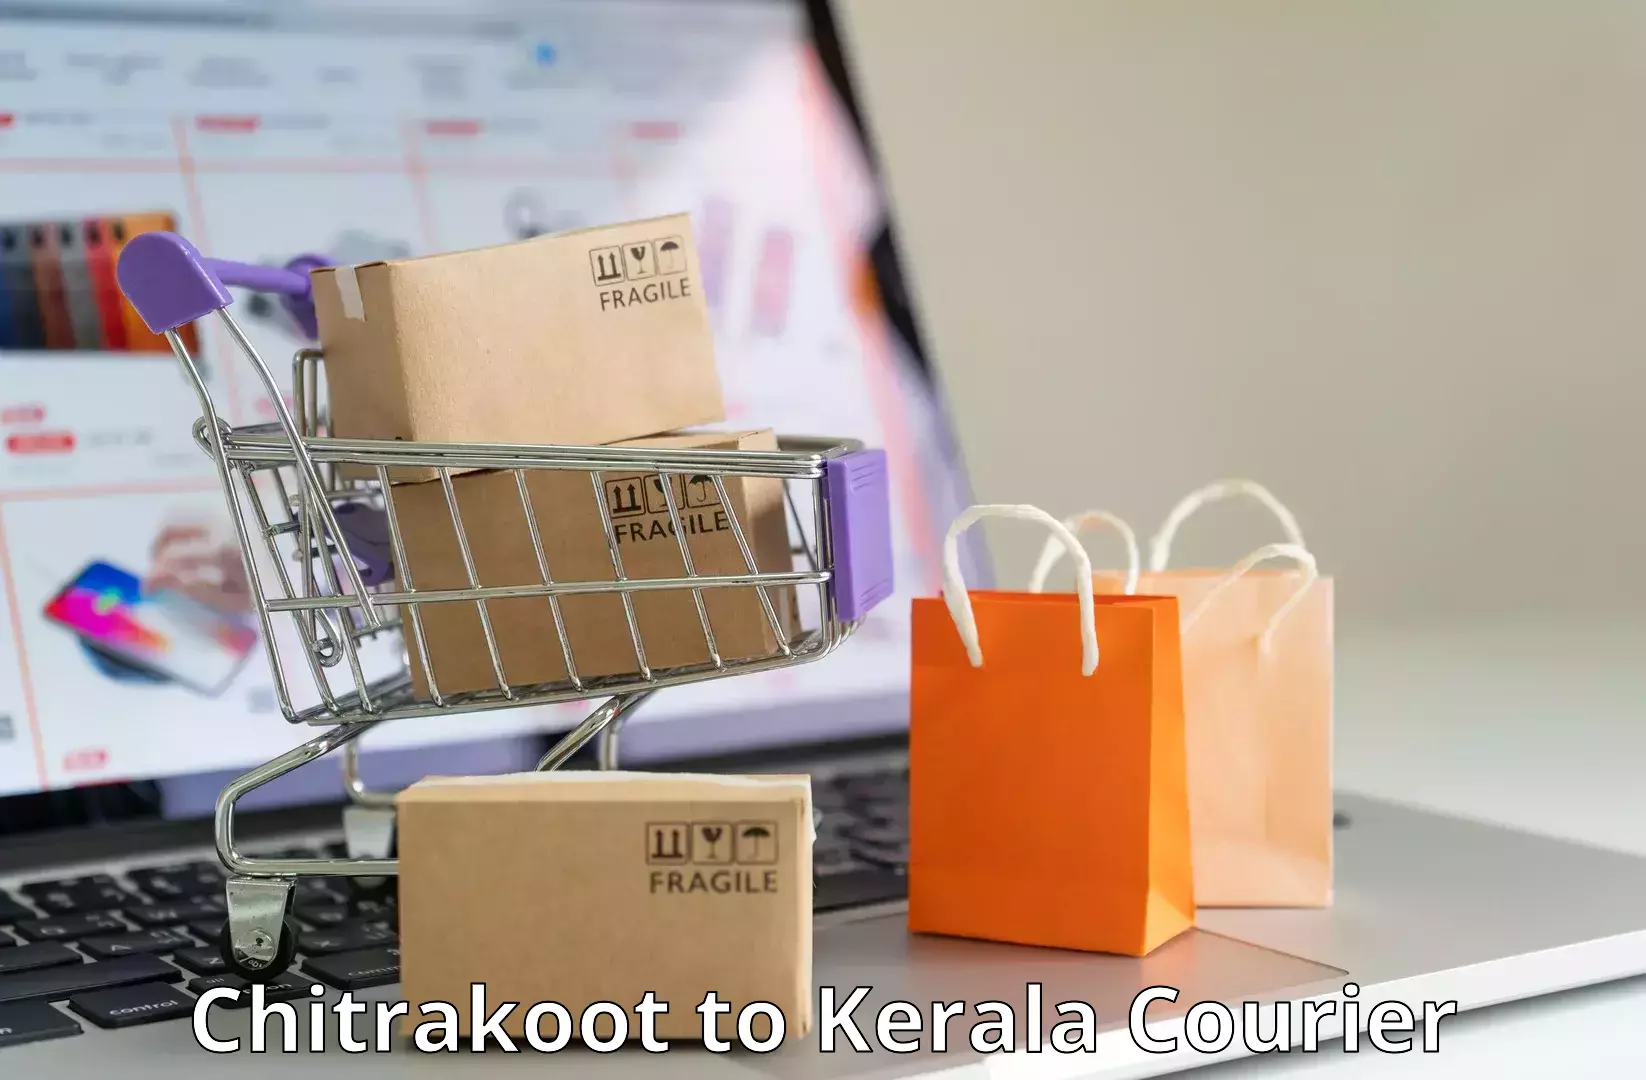 High-quality delivery services Chitrakoot to Kerala